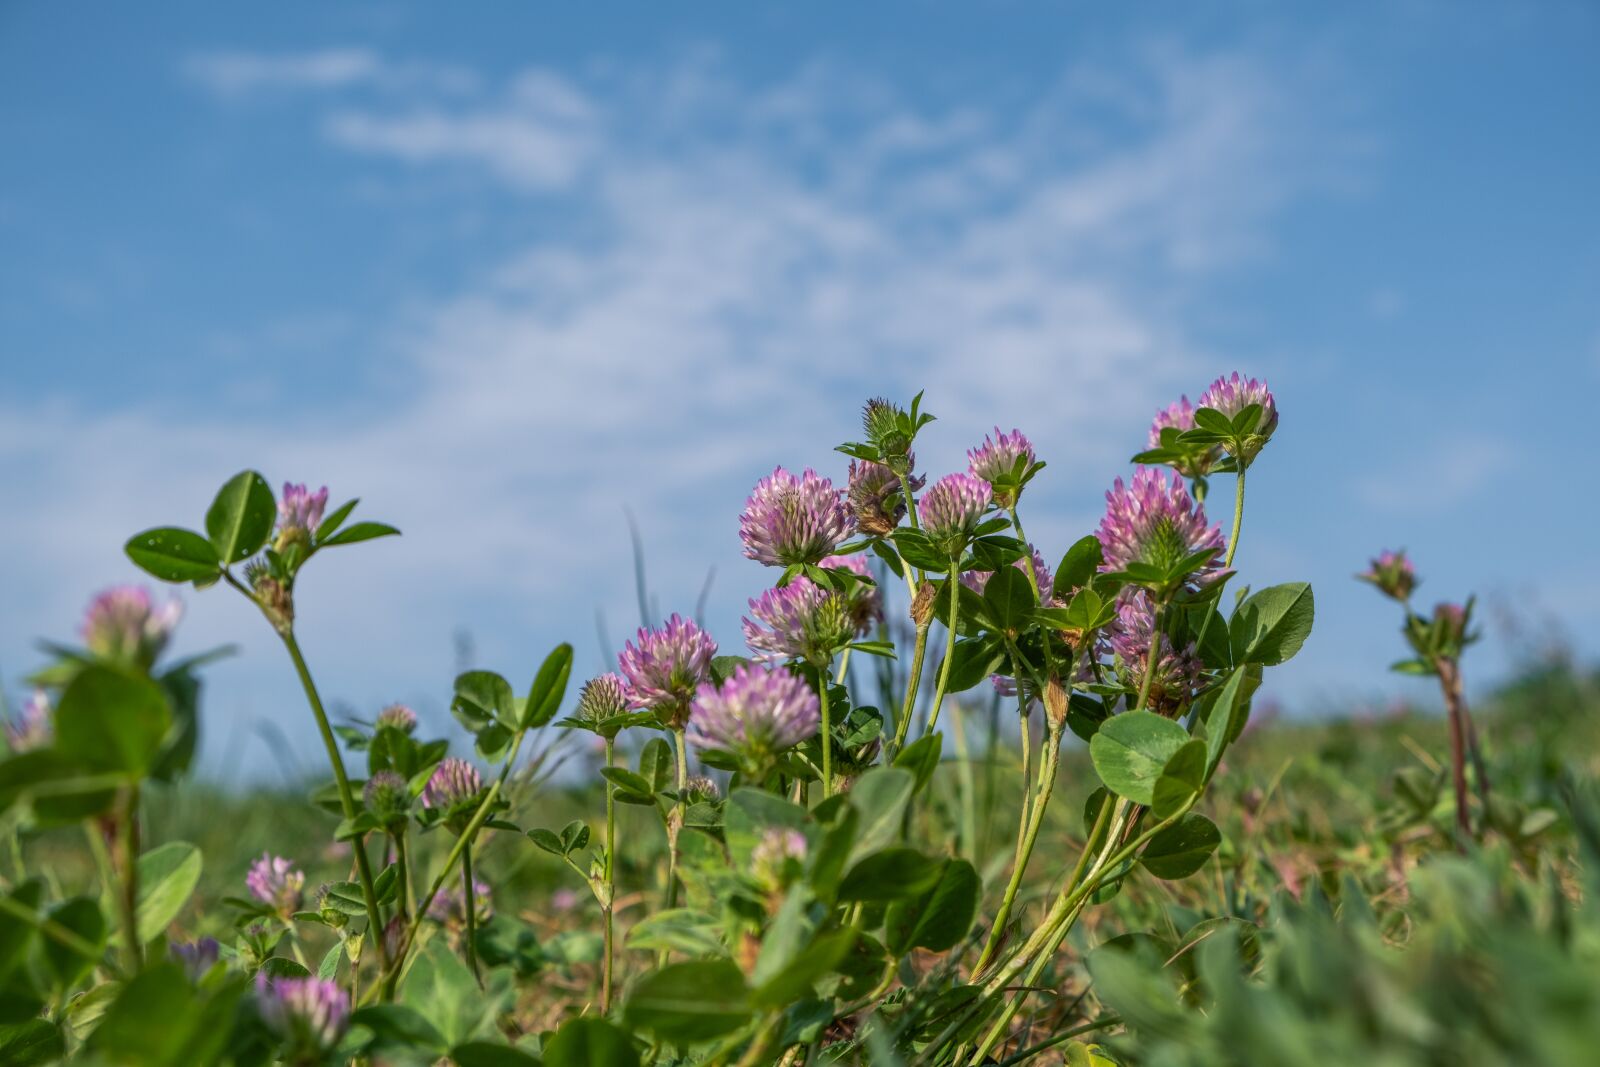 Fujifilm X-T30 sample photo. Klee, red clover, plant photography